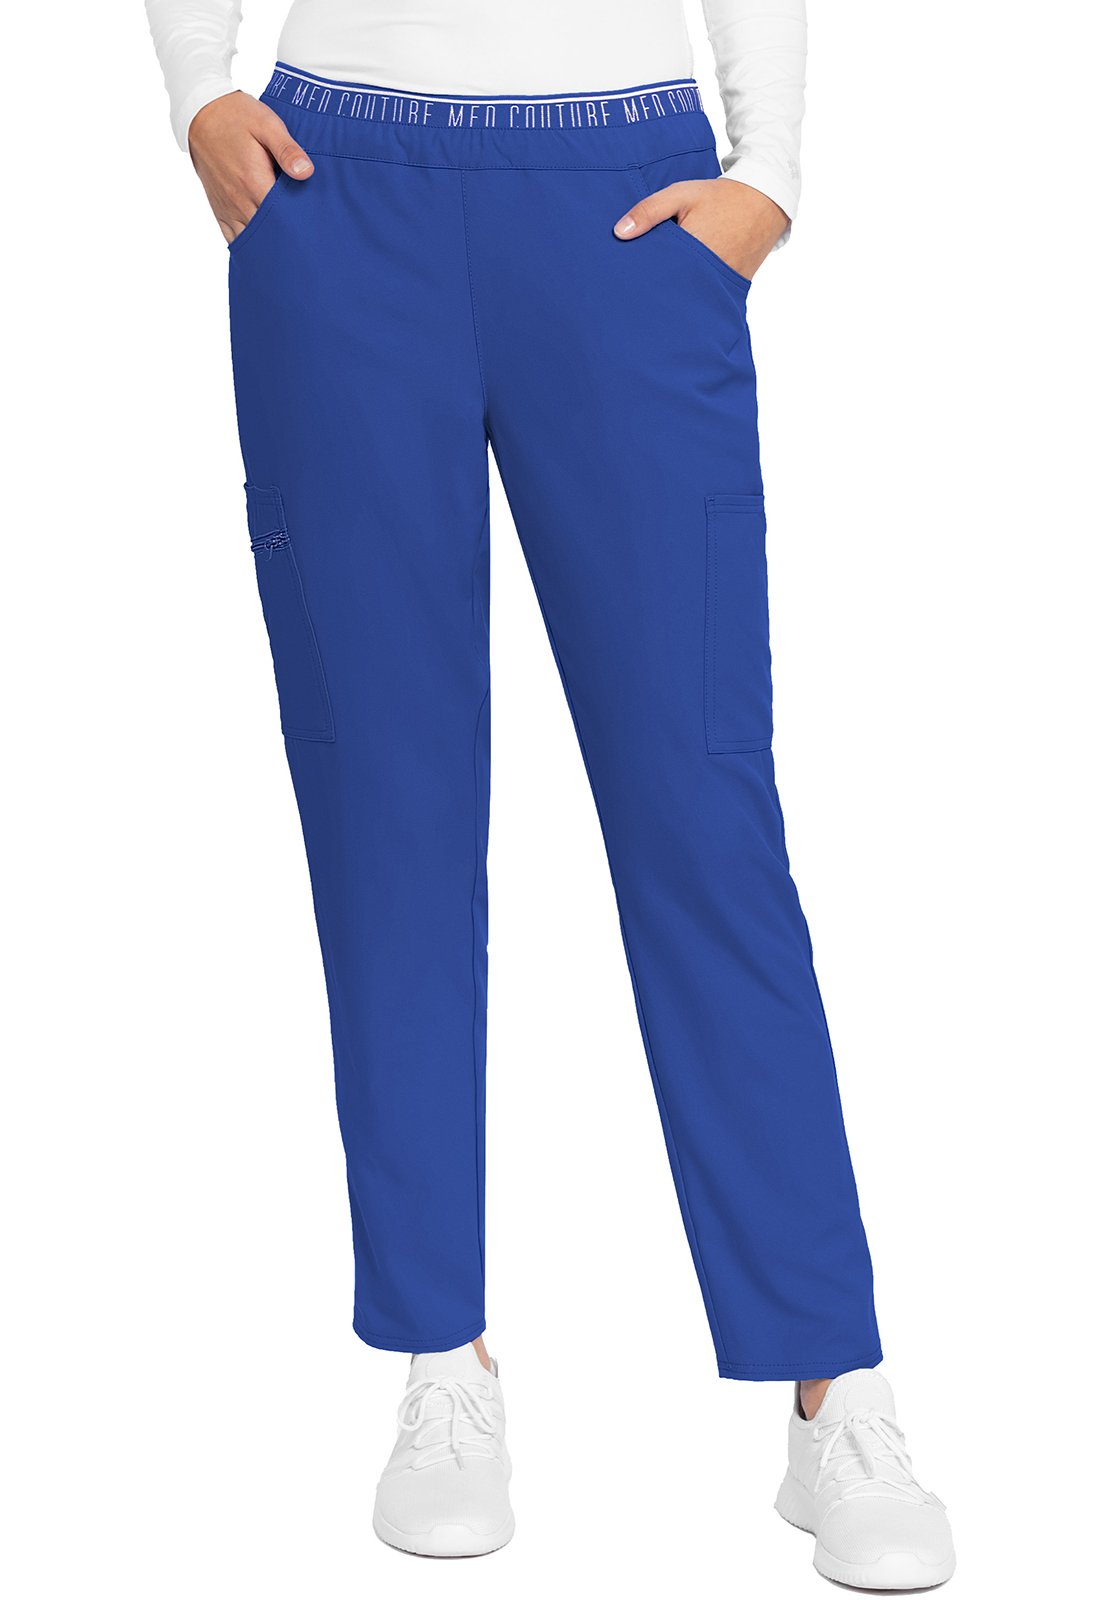 Med Couture MC Insight Royal / 3XL MC Insight  Mid-rise Tapered Leg Pull-on Pant MC009